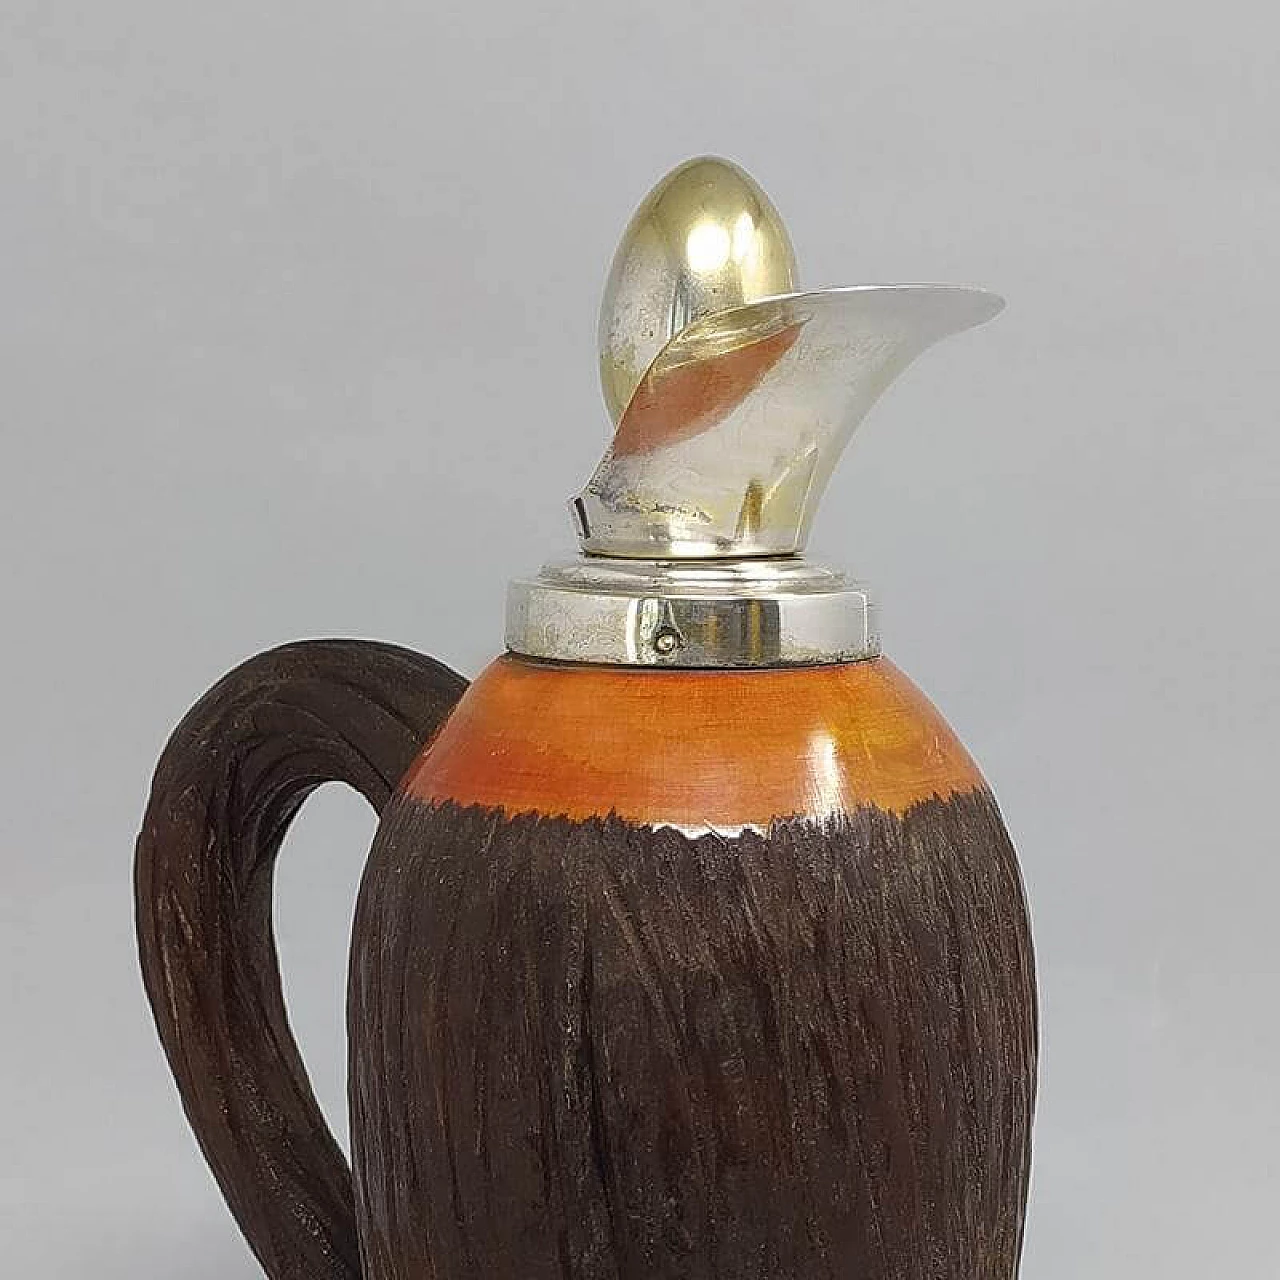 1950s Stunning Aldo Tura Pitcher in Brass and Wood, Made in Italy 1183880